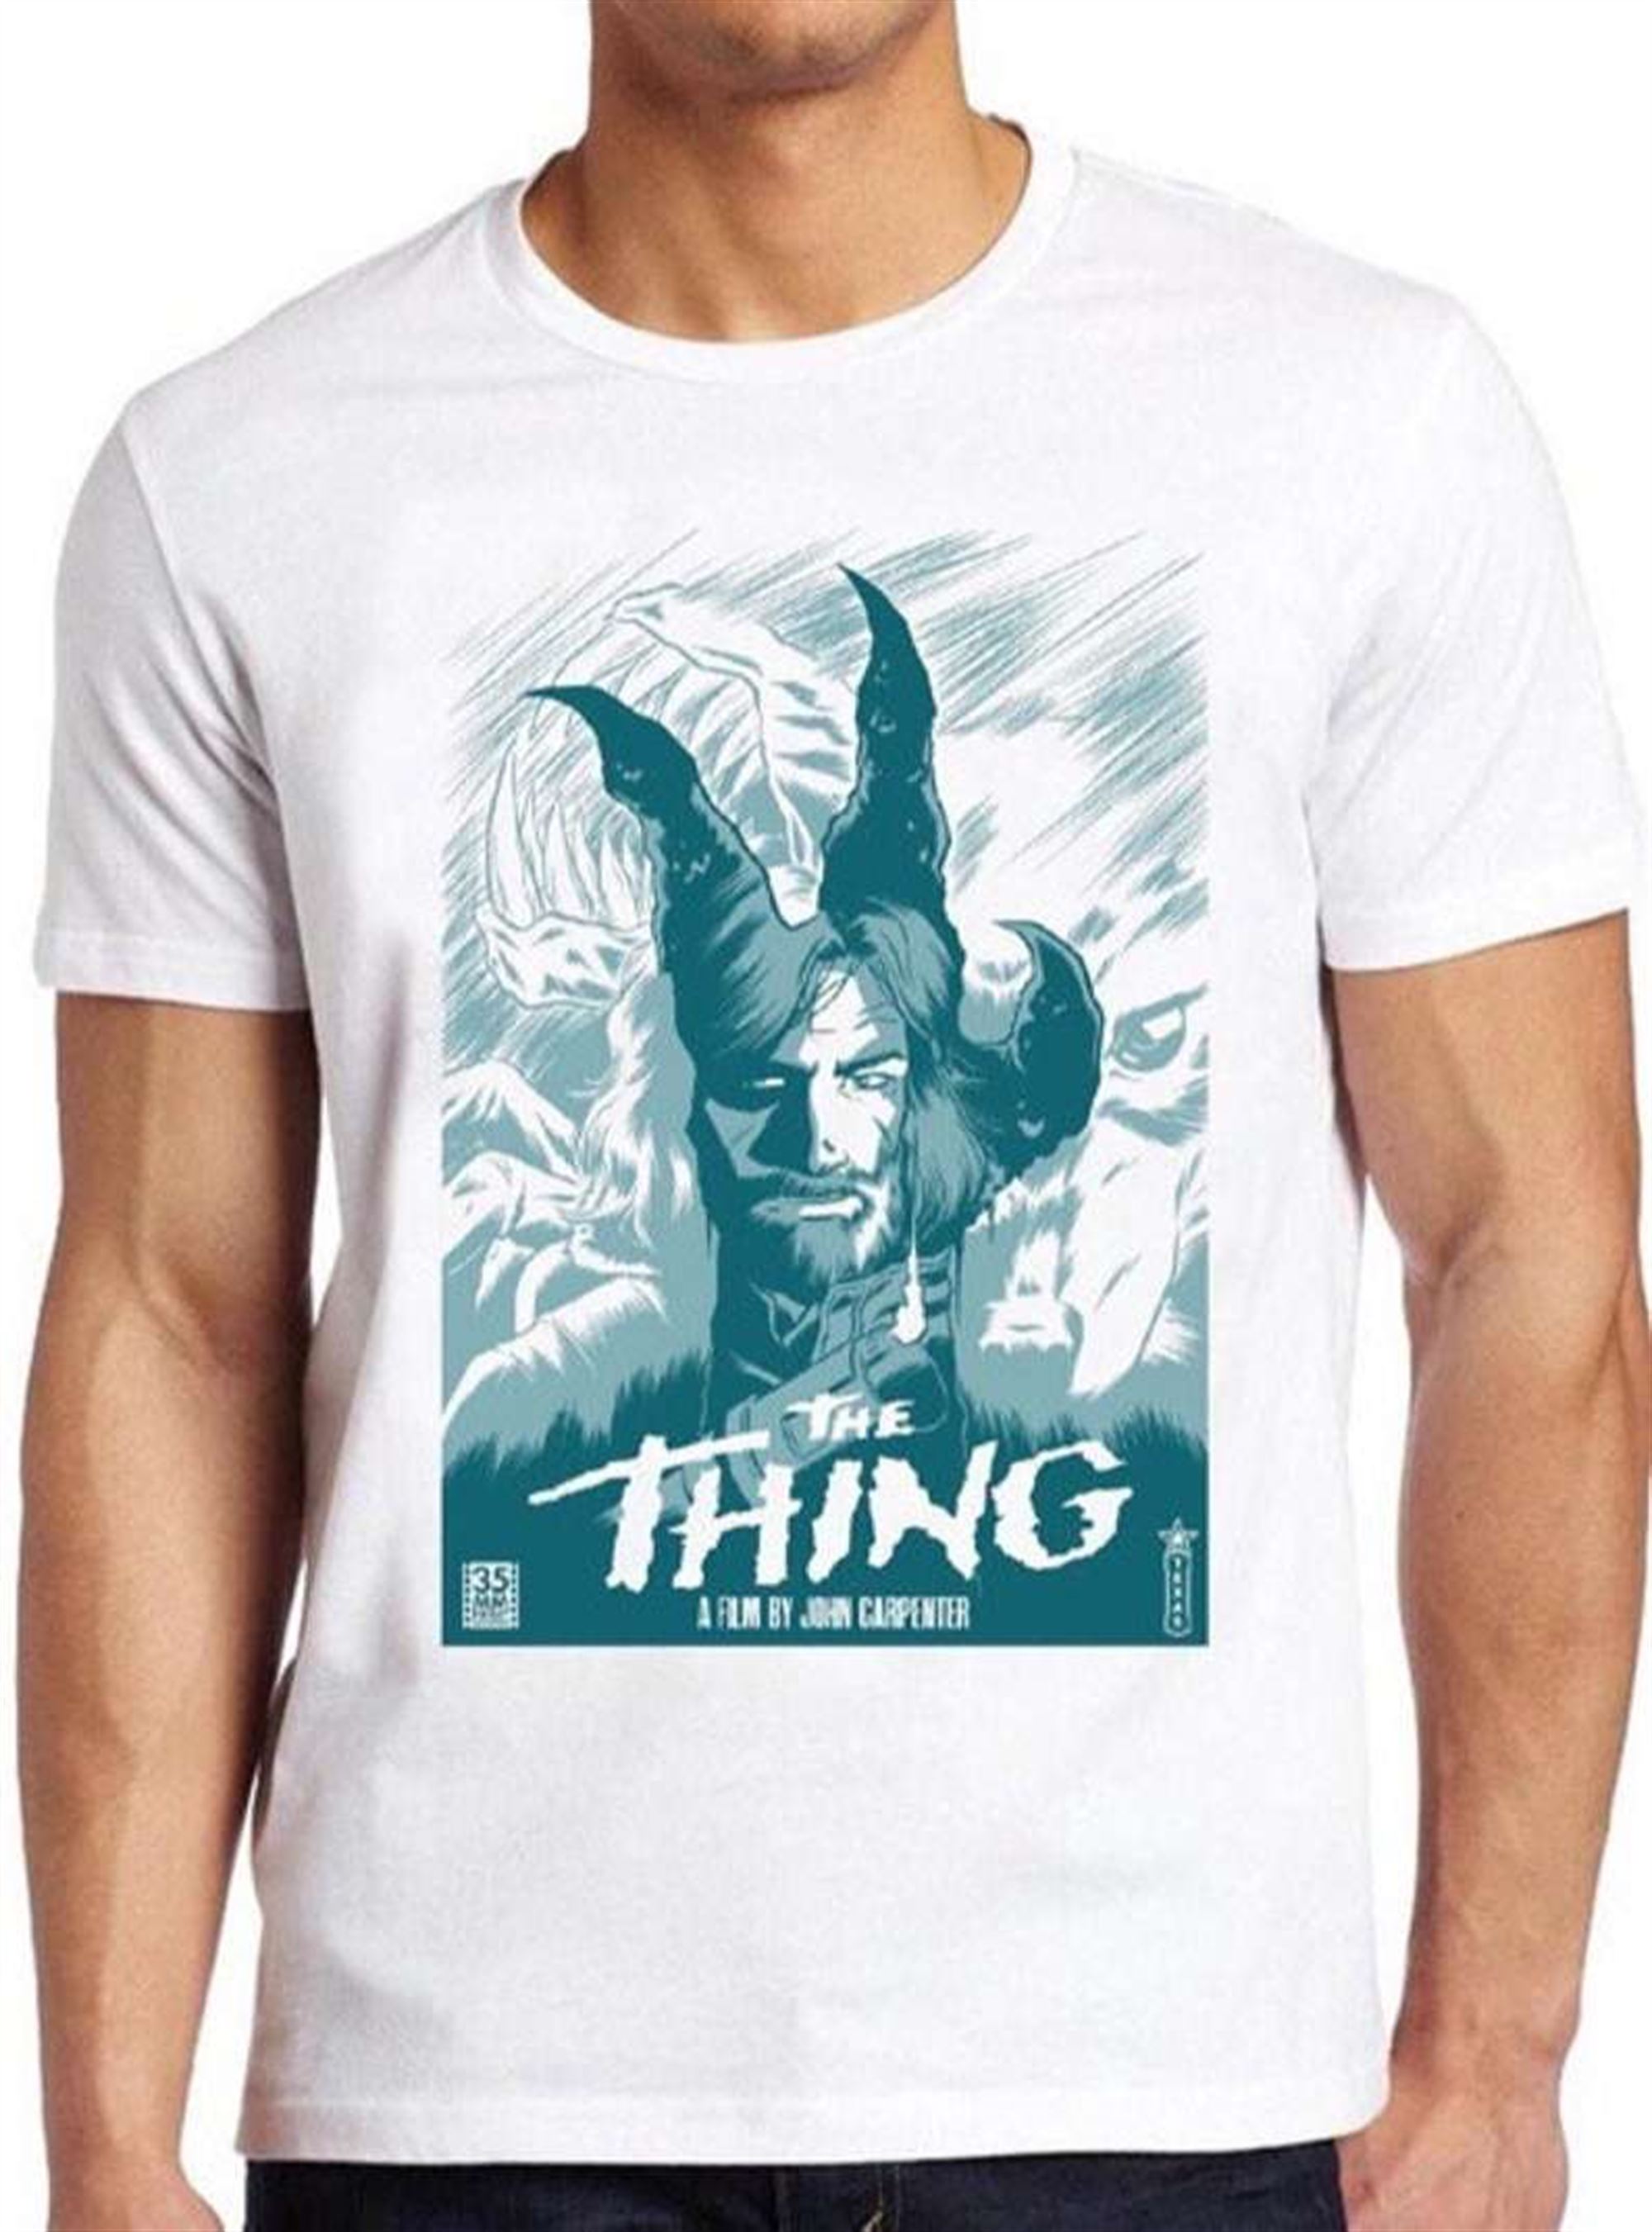 The Thing T Shirt Horror Movie Film 80s Sci Fi Full Size Up To 5xl